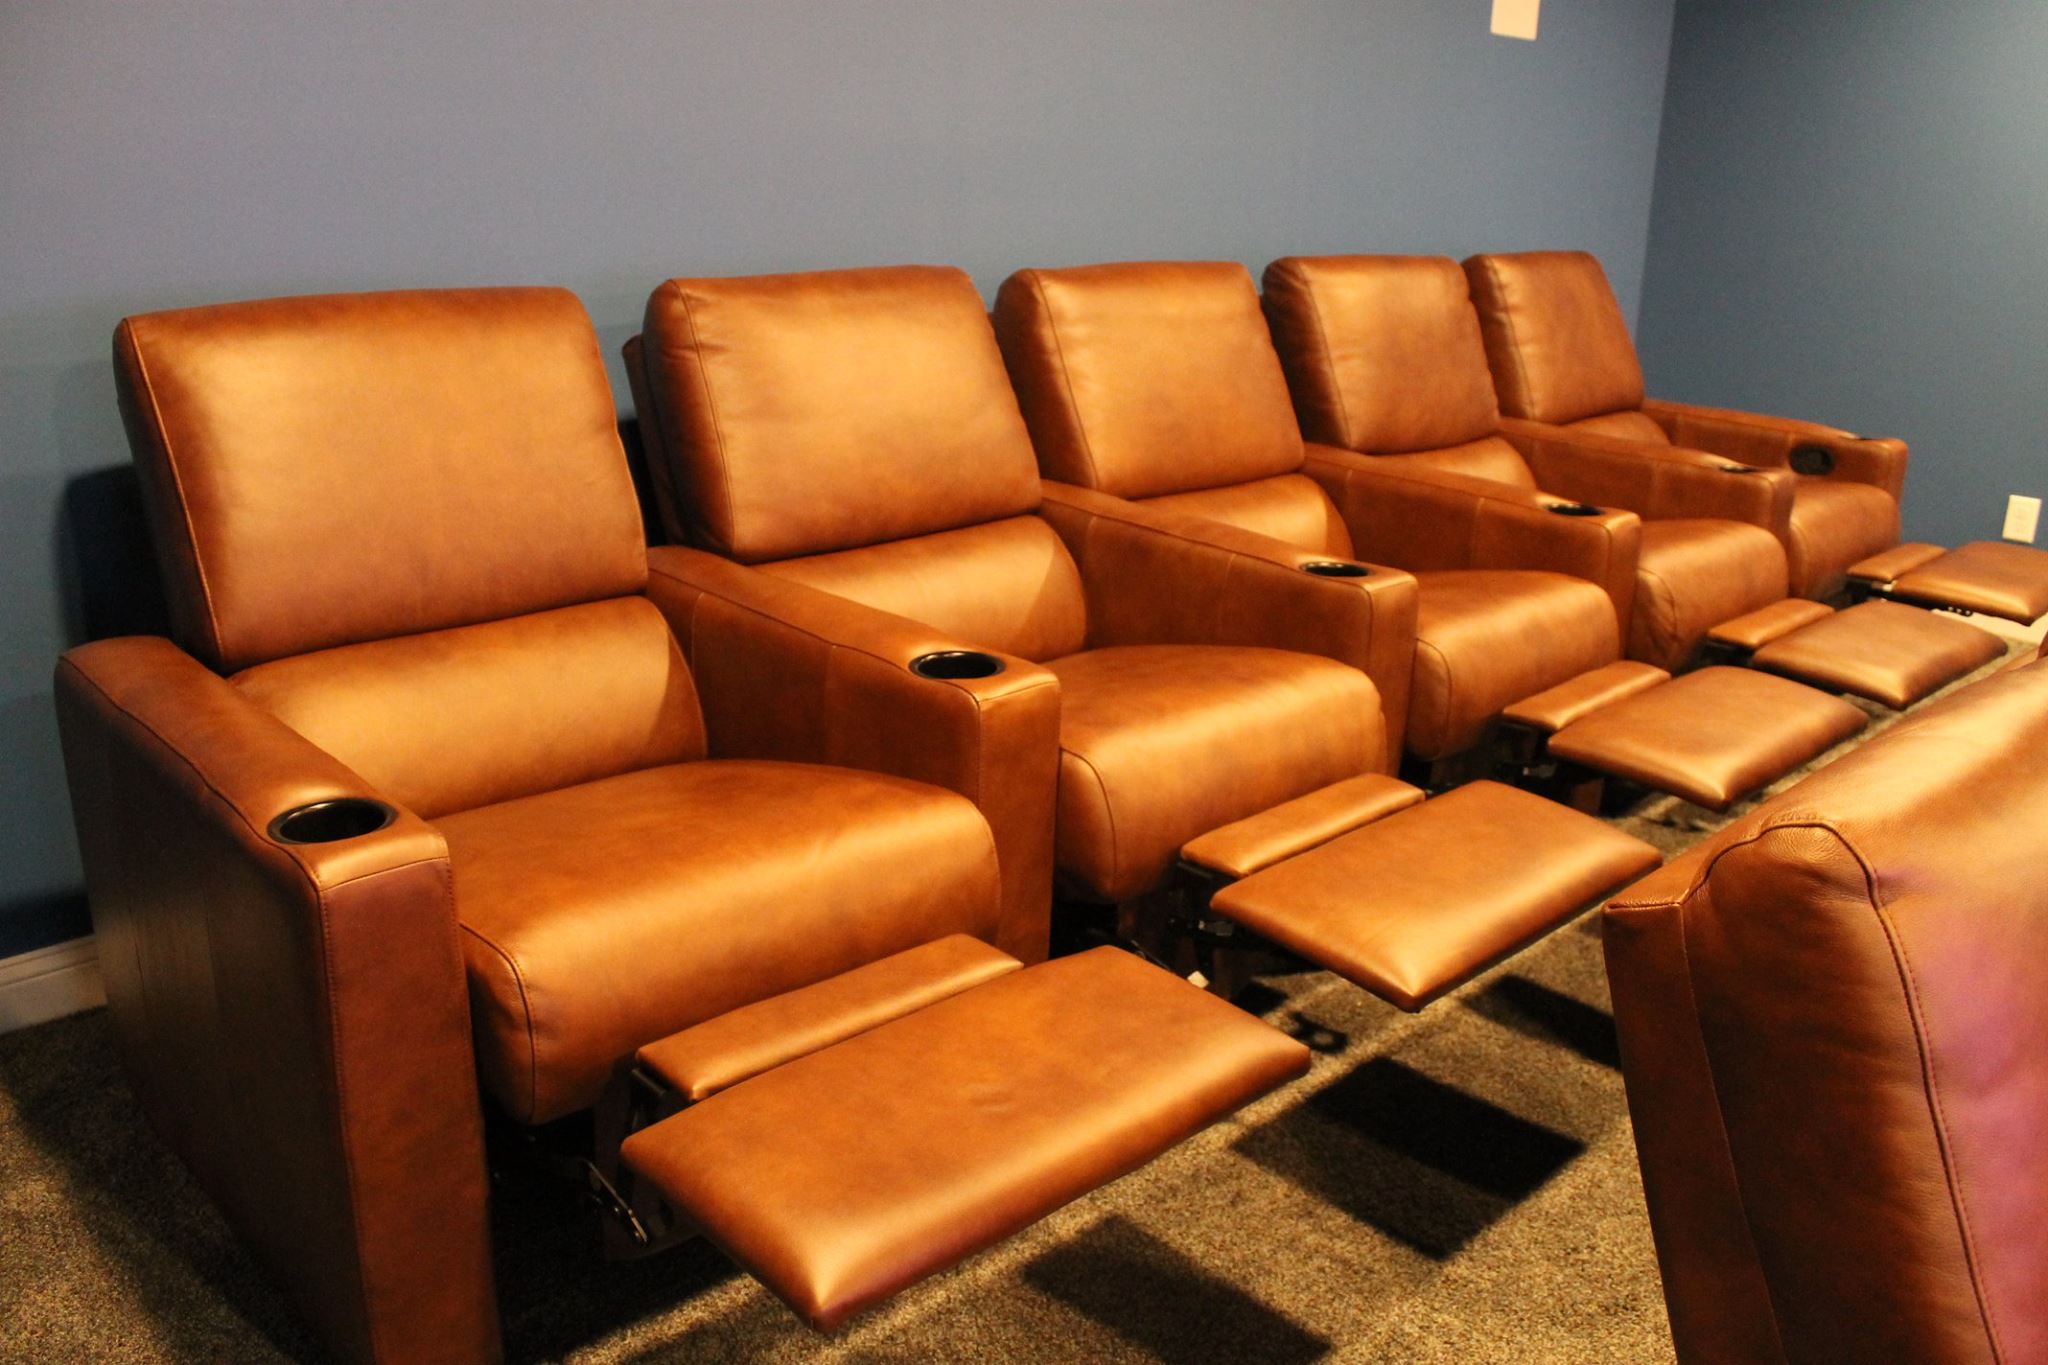 Home Theater Seating by United Leather Midlothian, VA